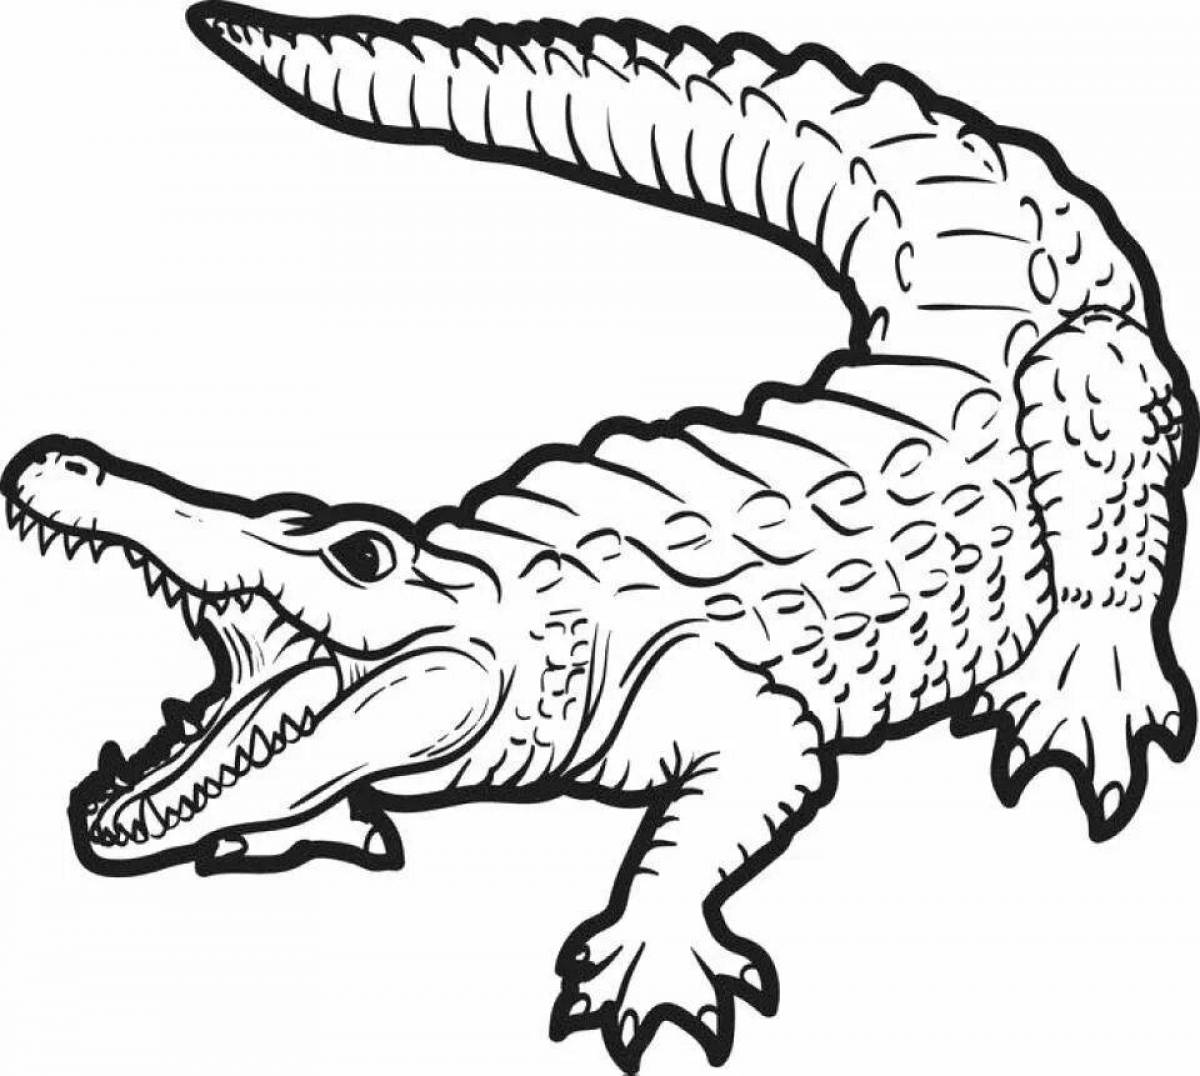 Cunning crocodile coloring page